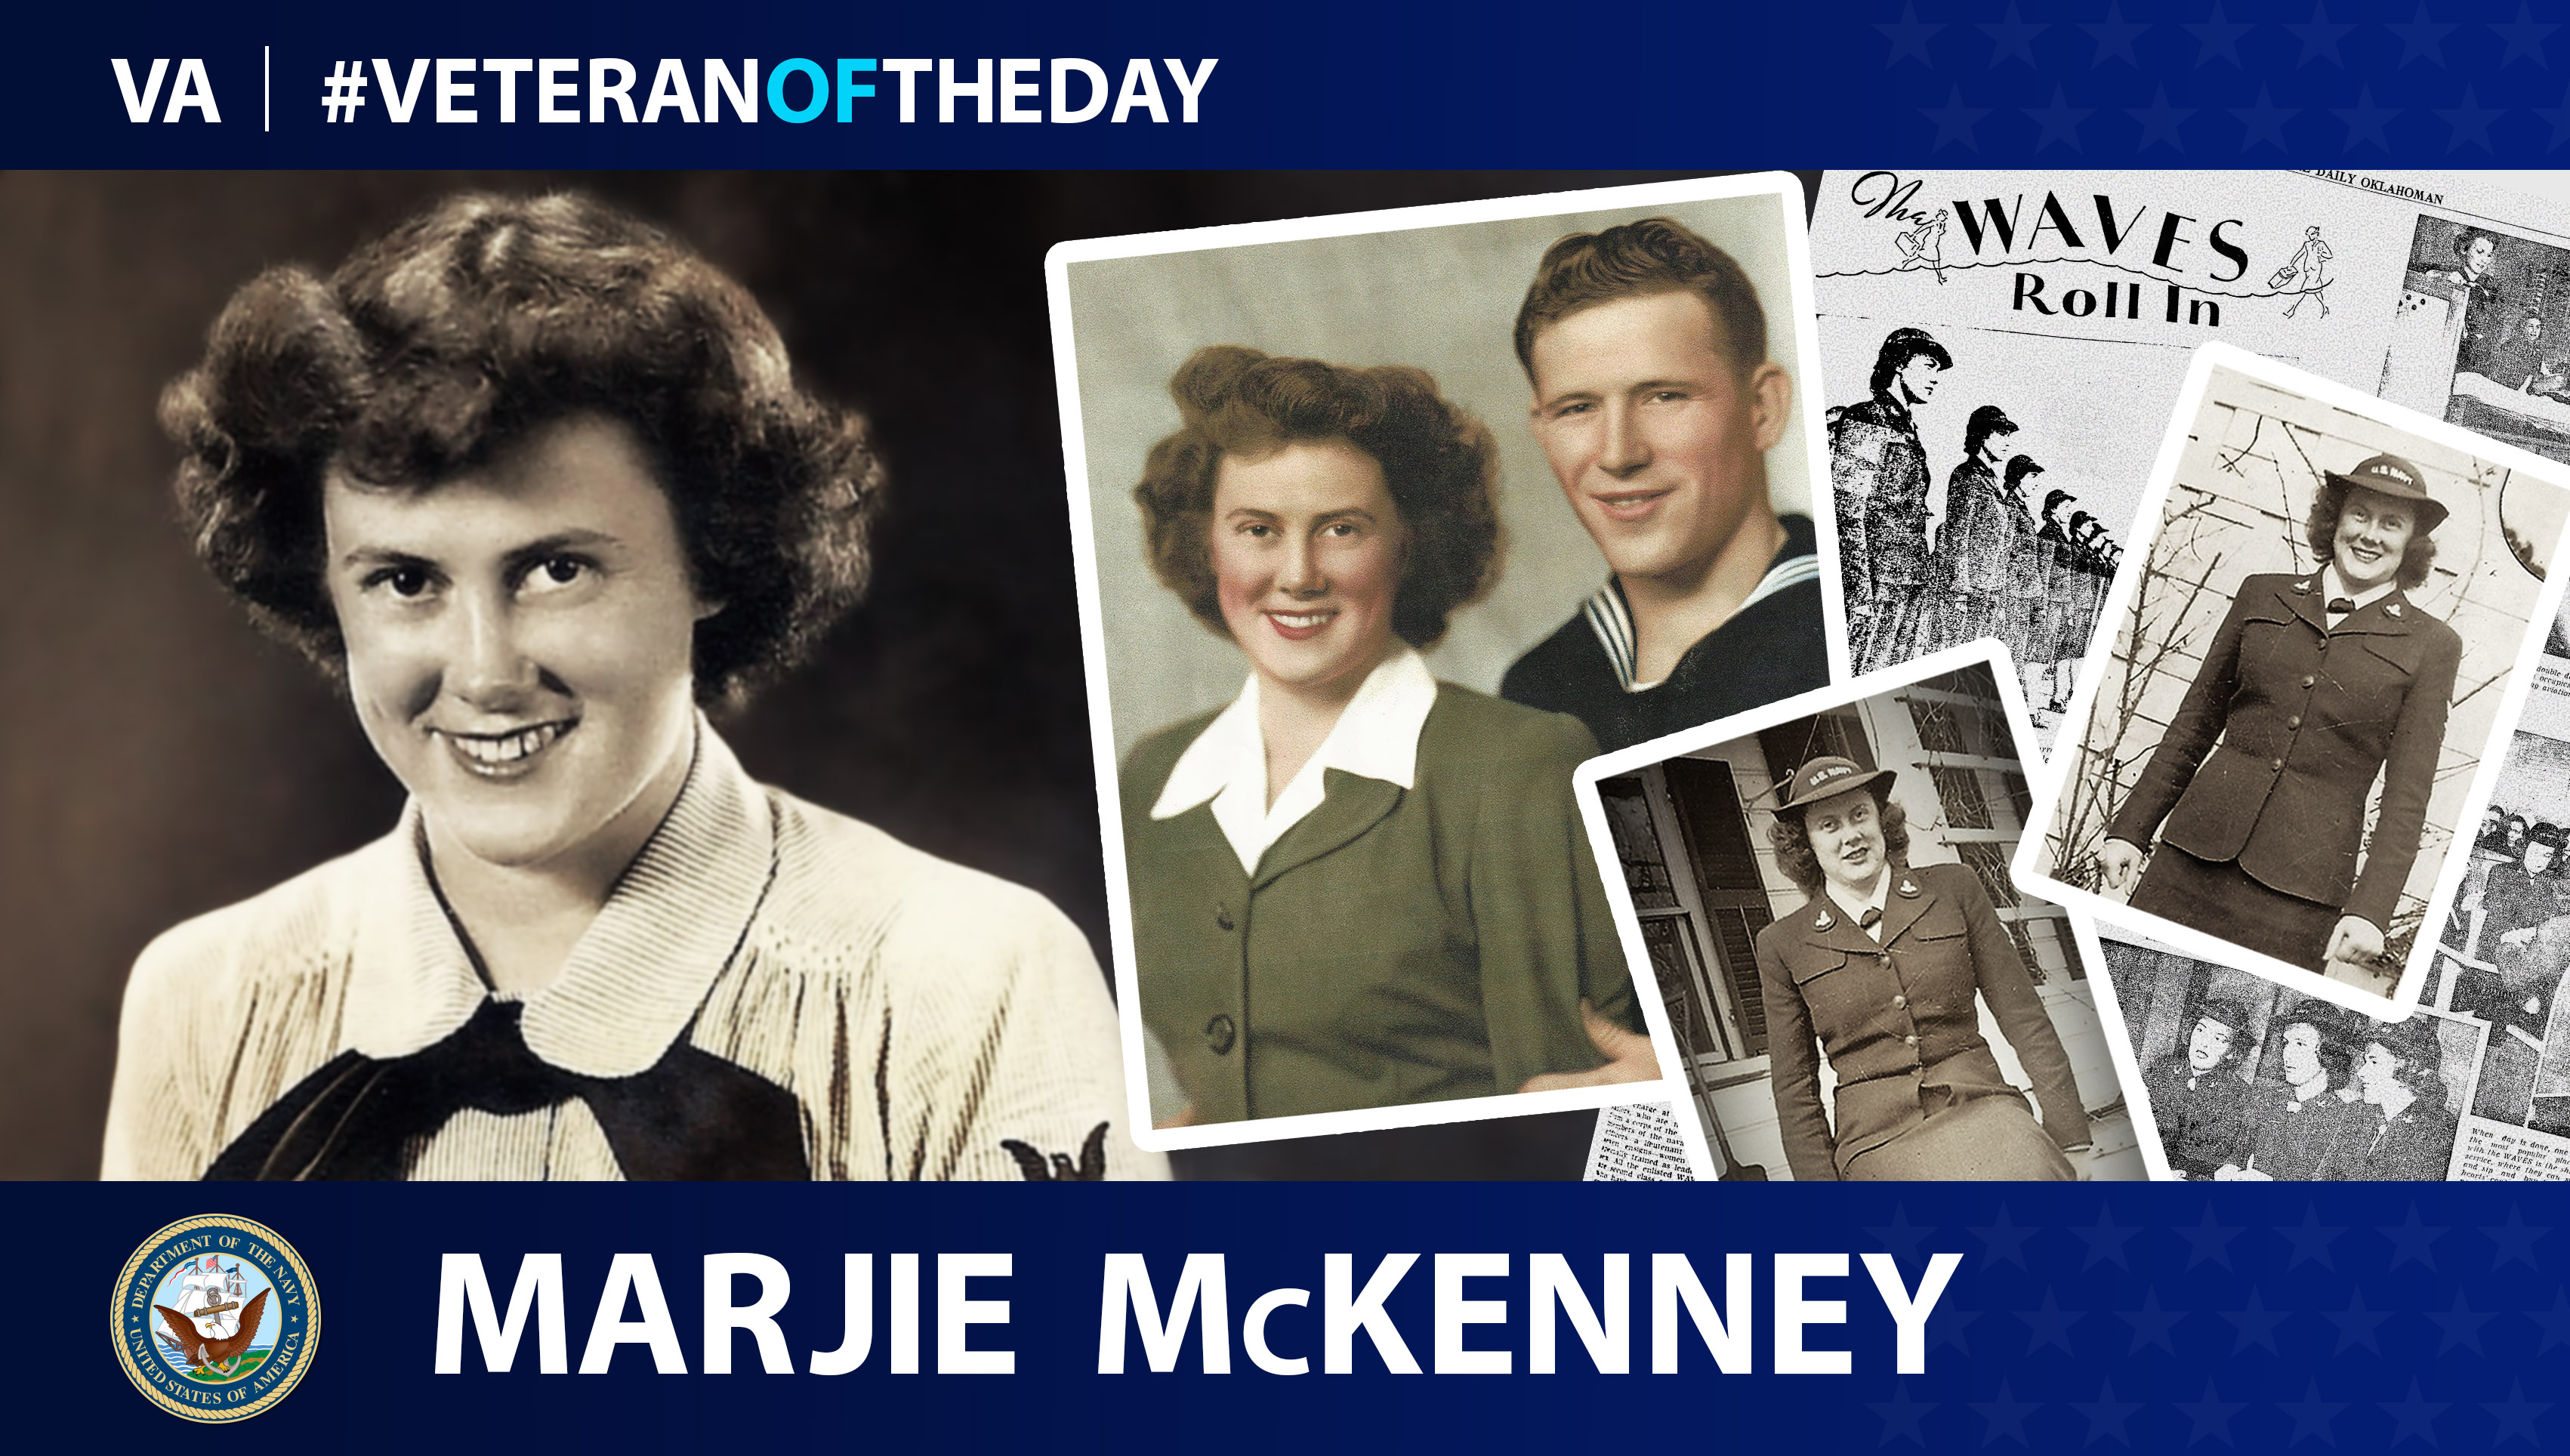 Marjie McKenney is today's Veteran of the Day.